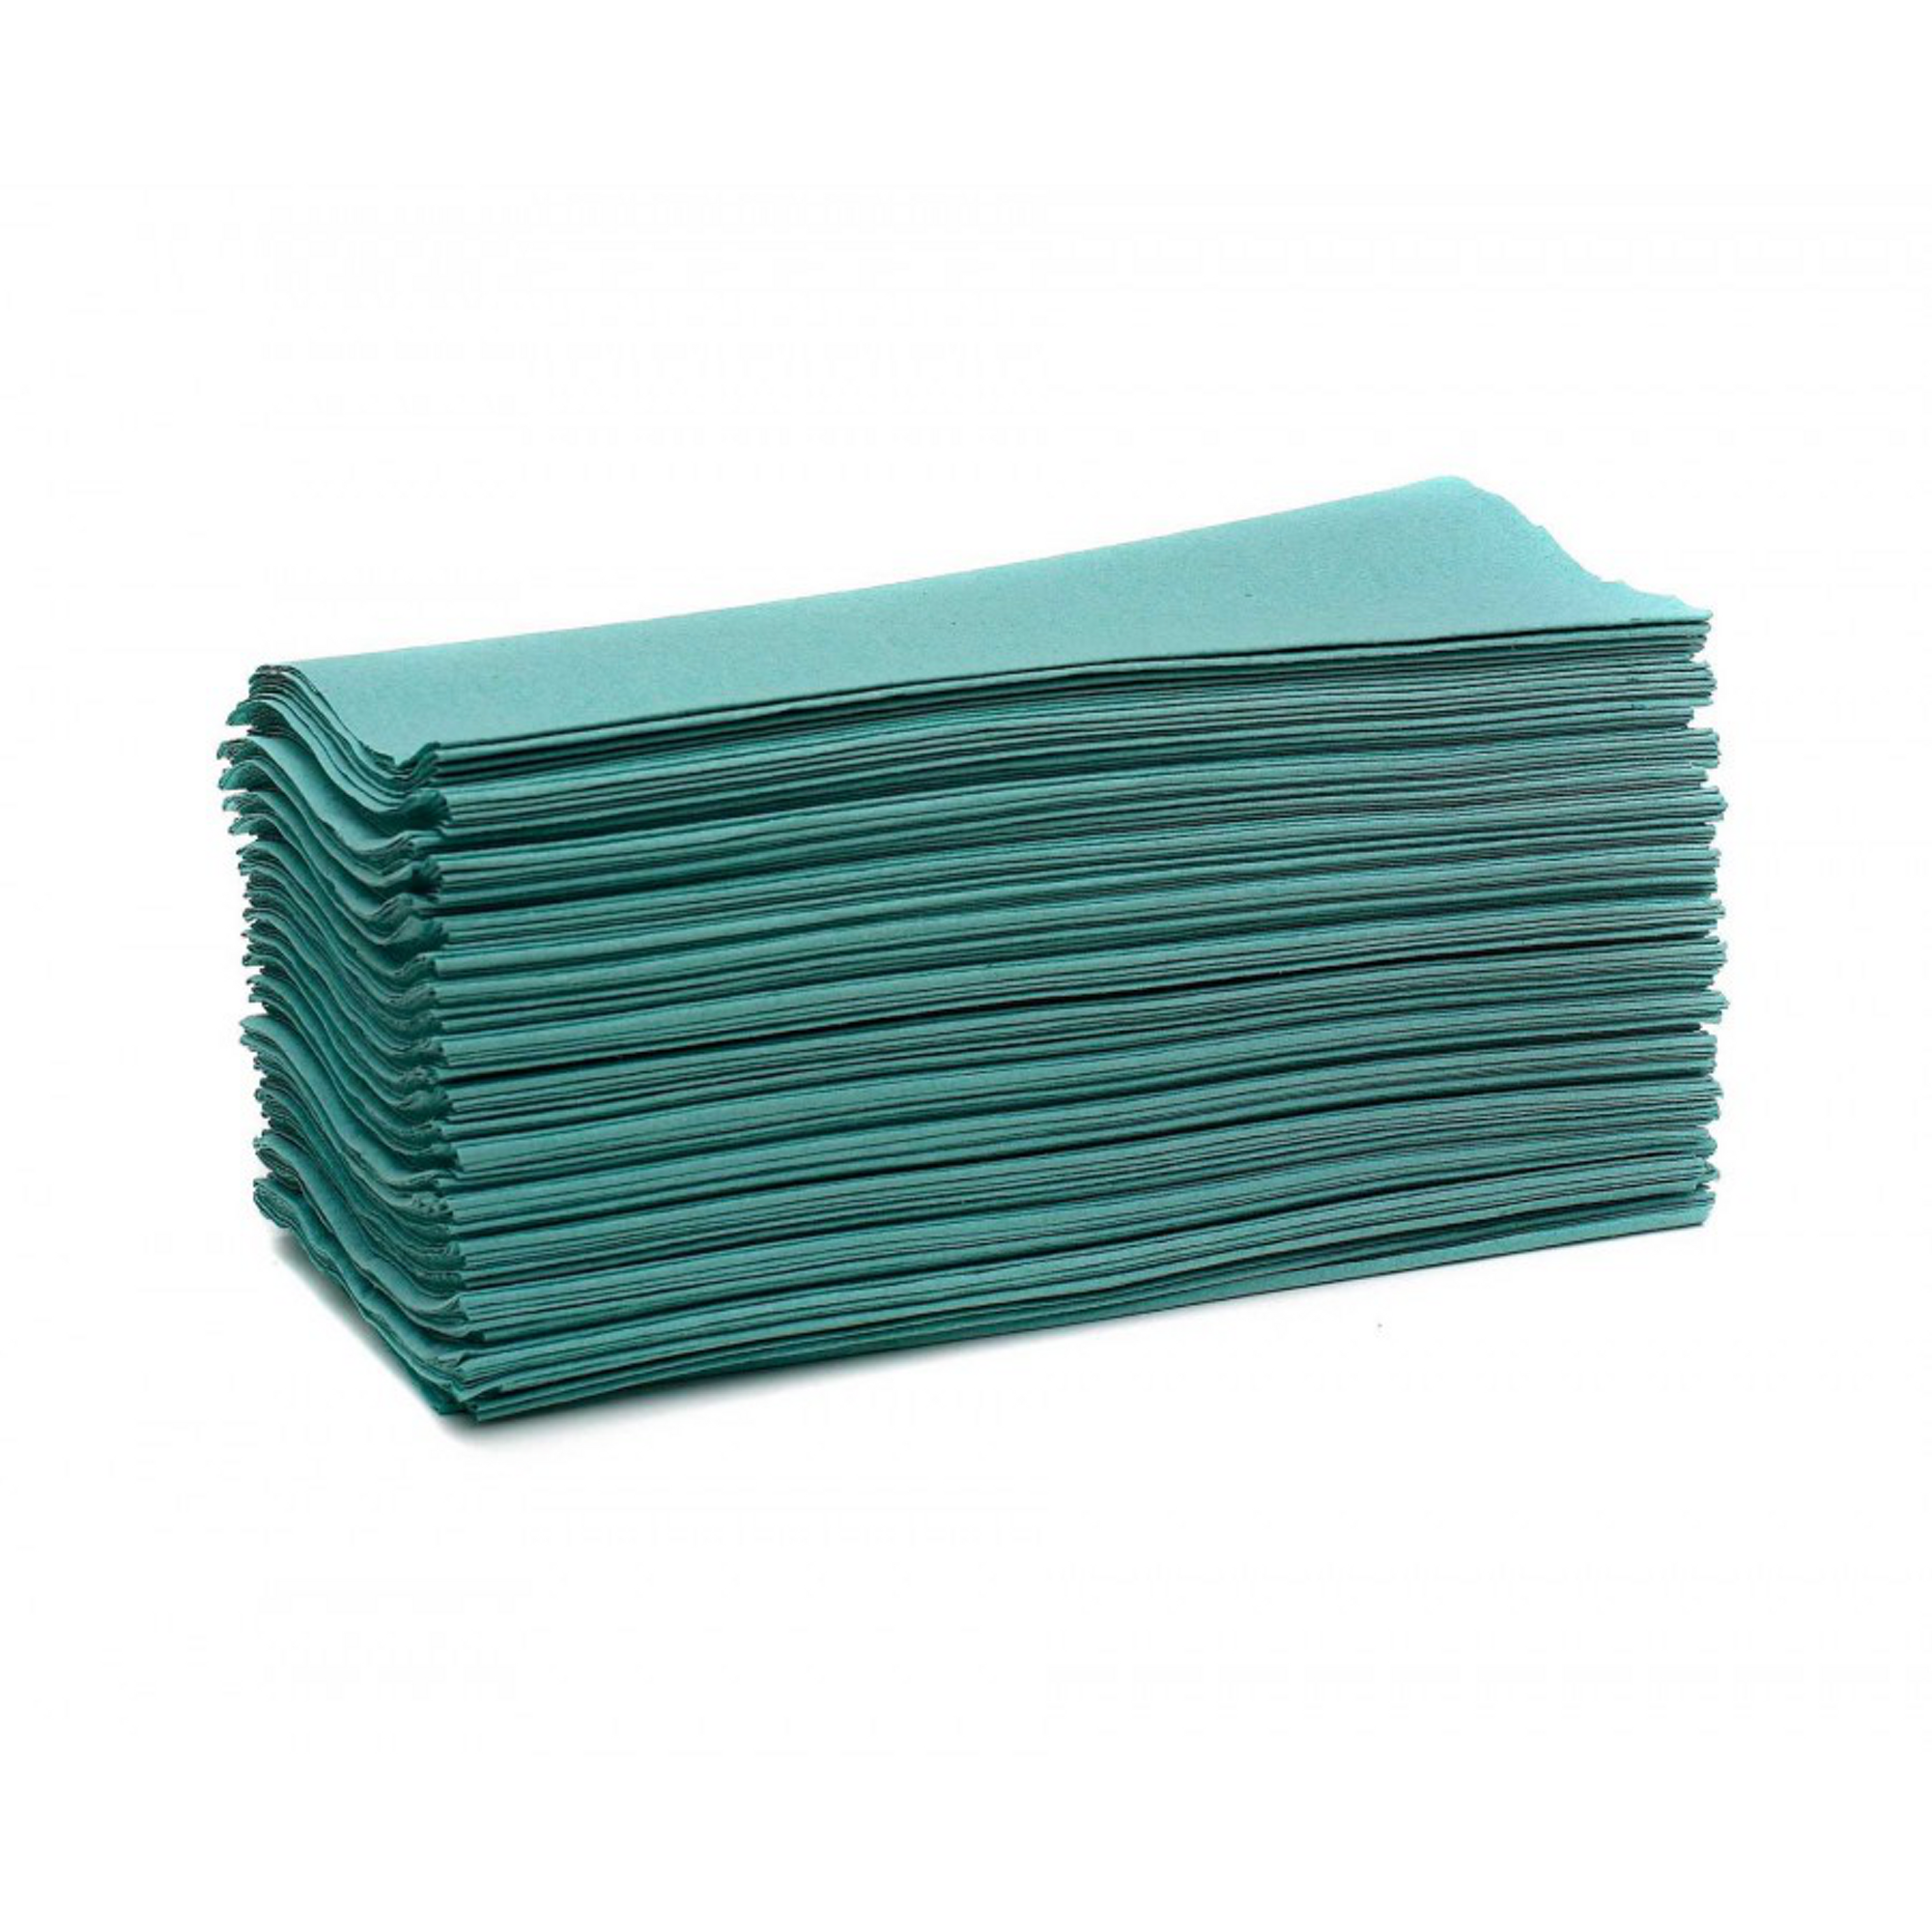 Classmates C/Fold Hand Towel Green 1ply -  Pack of 15